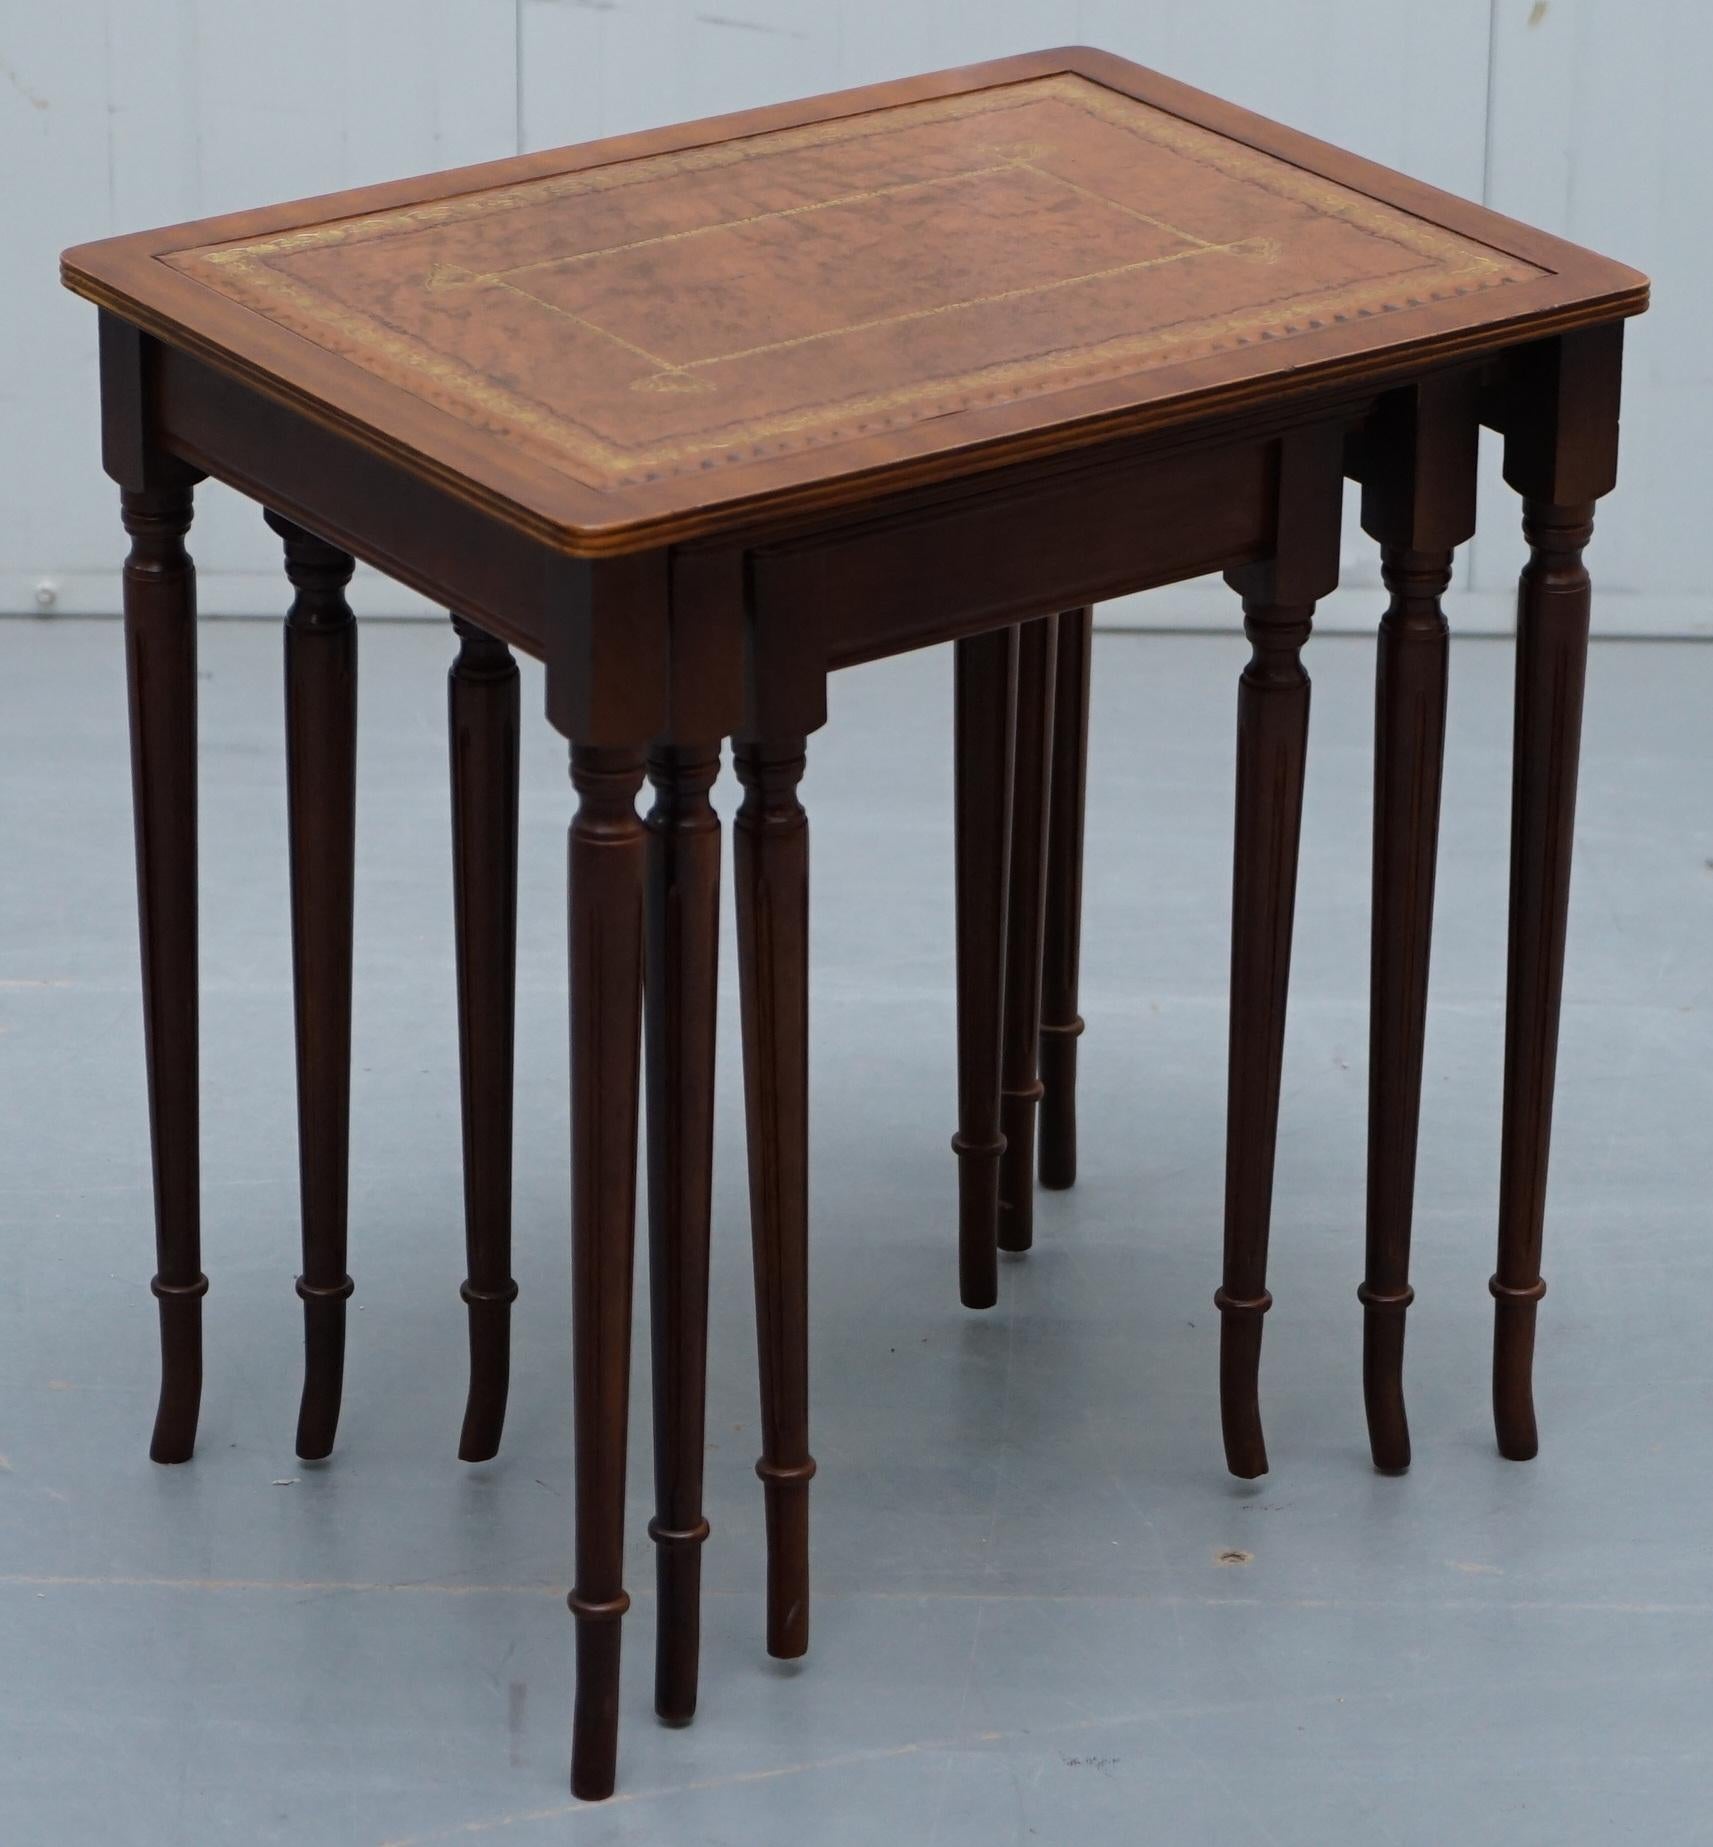 We are delighted to offer for sale this lovely small nest of three Mahogany tables with brown leather gold leaf embossed tops

A very good looking well made suite, most likely retailed through Bevan Funnel or Brights of Nettlebed, they are around